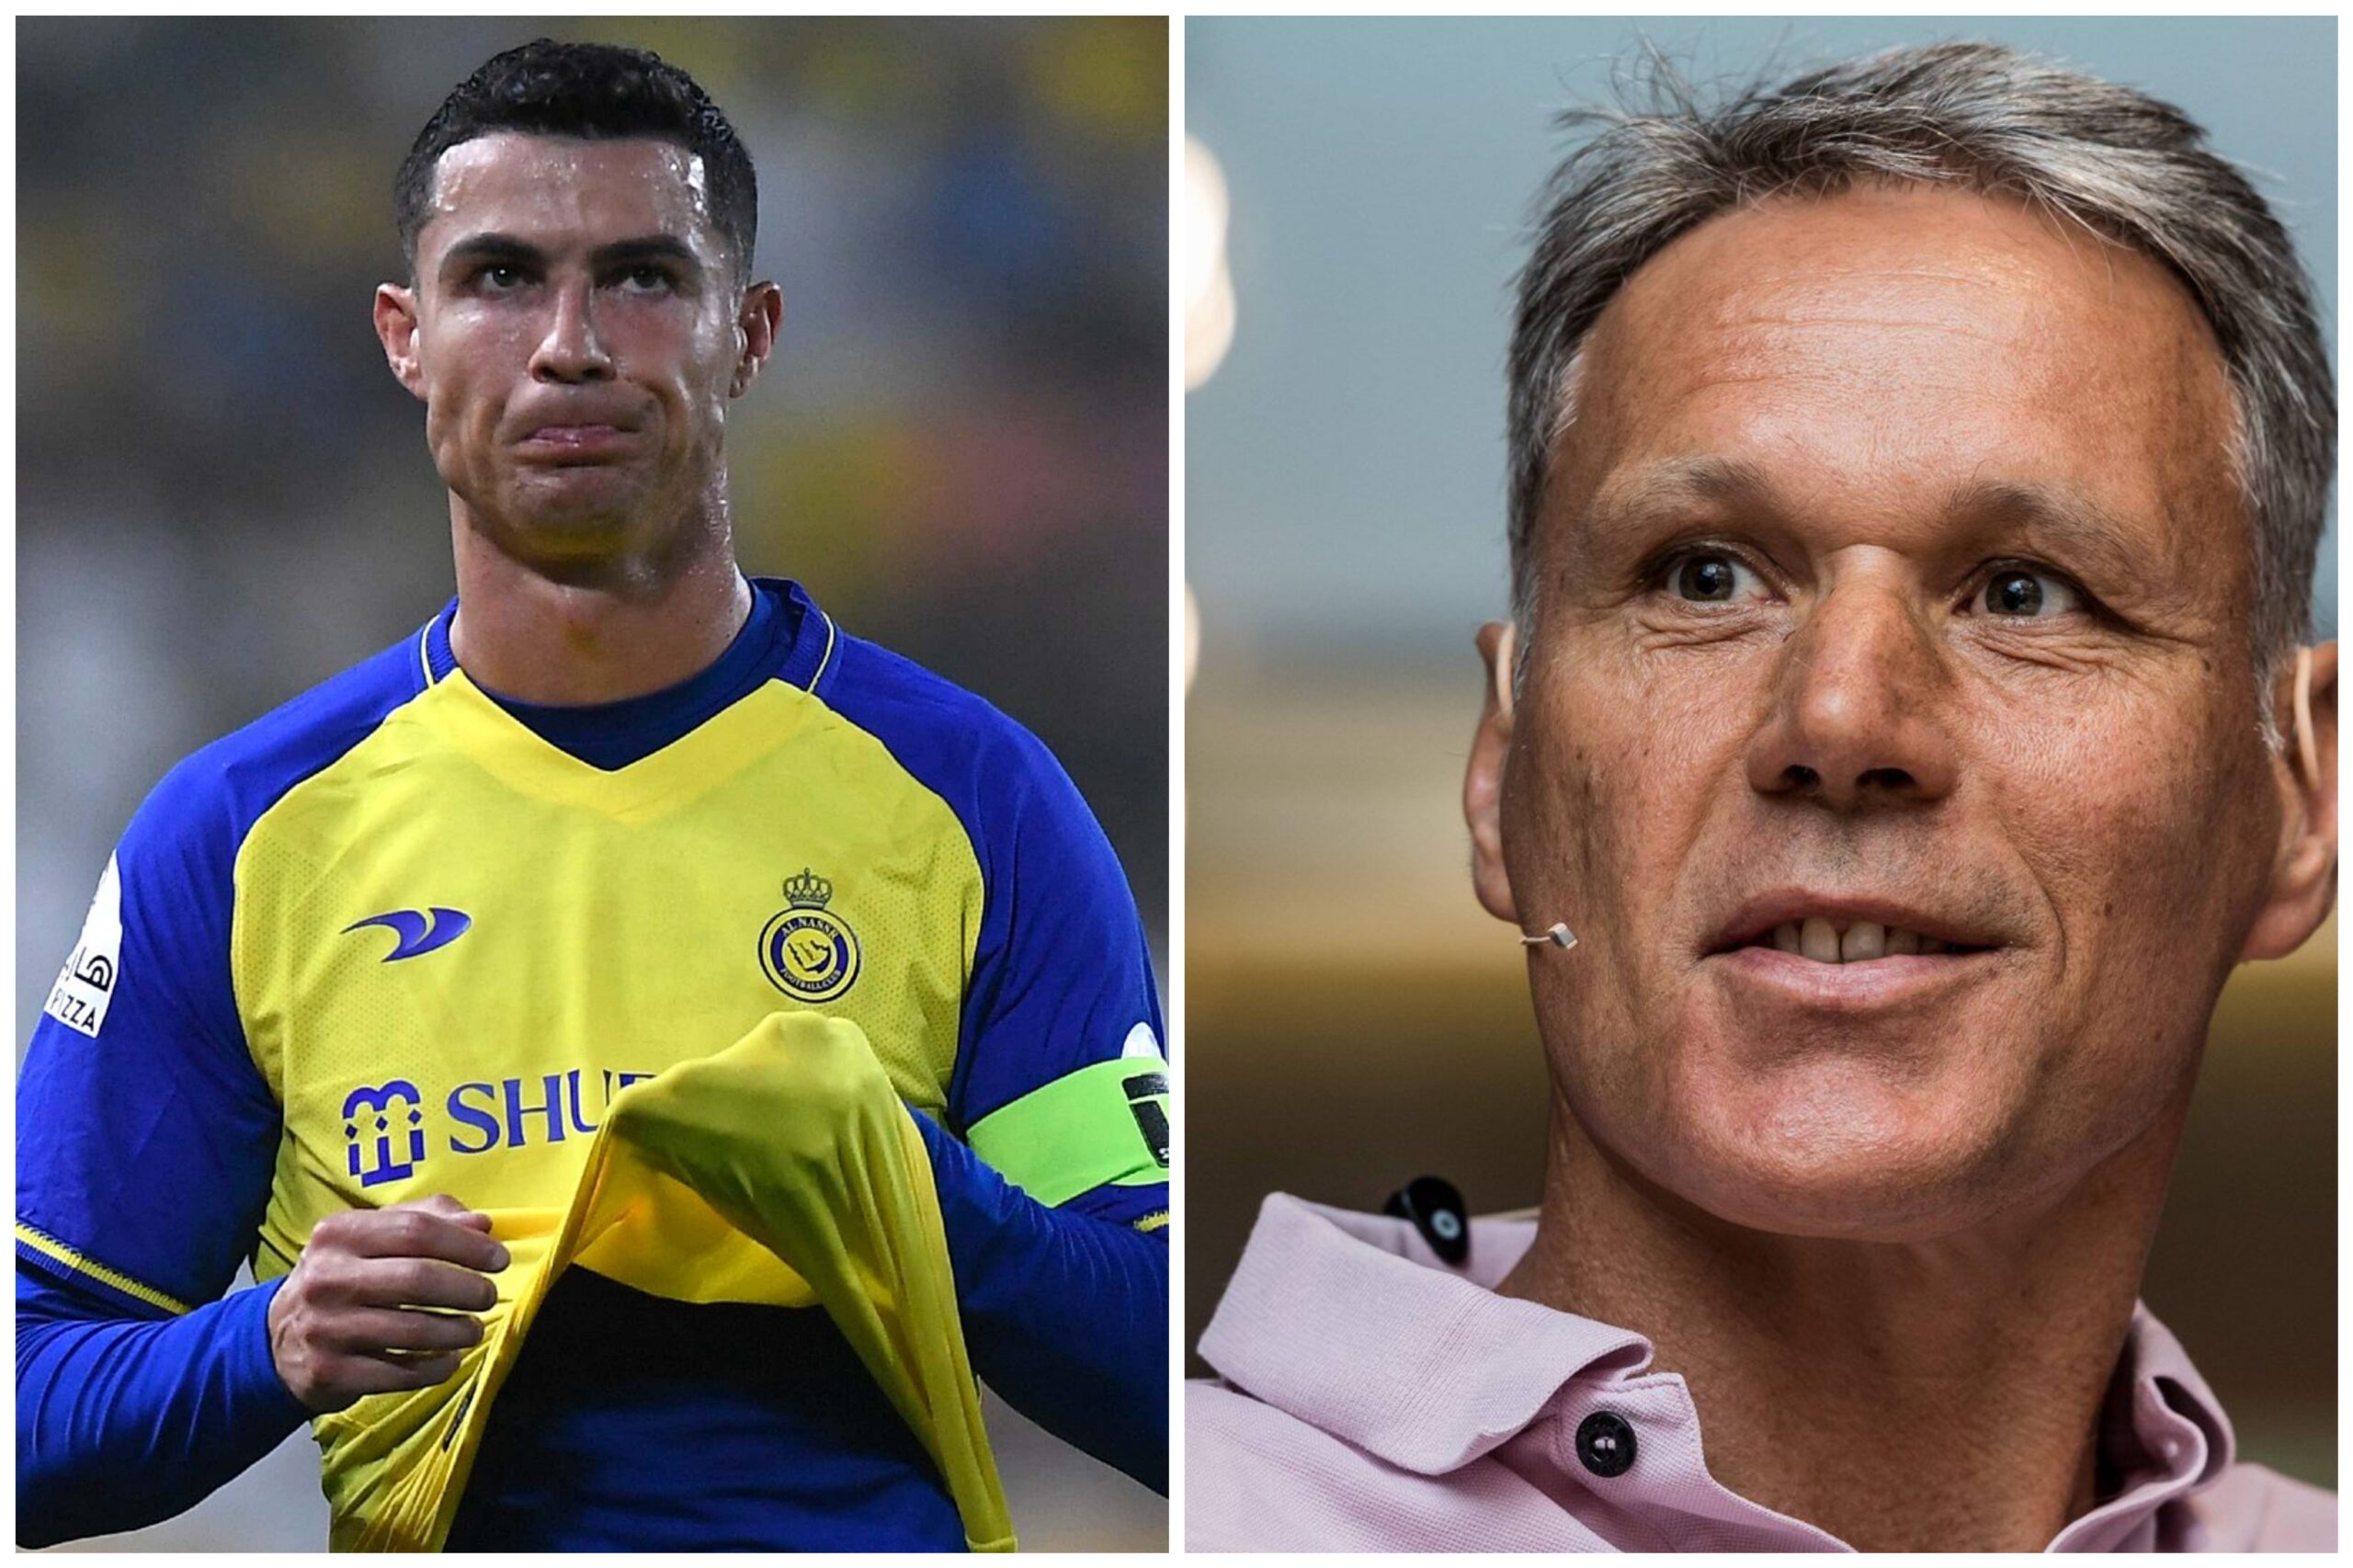 He’s Getting Closer To Me – Marco Van Basten Compares Himself To Cristiano Ronaldo